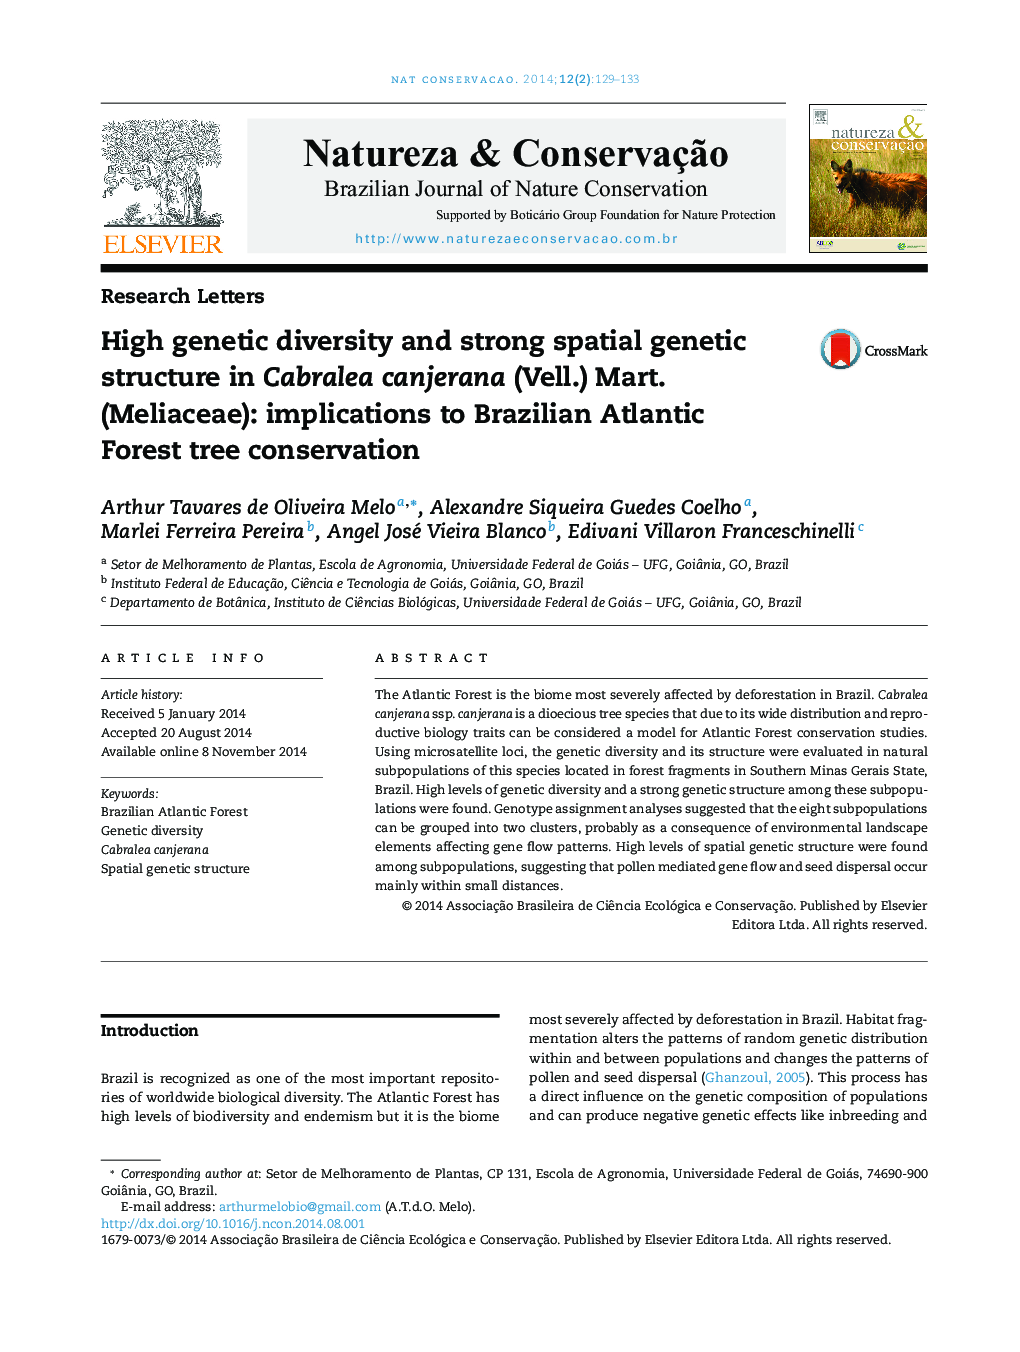 High genetic diversity and strong spatial genetic structure in Cabralea canjerana (Vell.) Mart. (Meliaceae): implications to Brazilian Atlantic Forest tree conservation